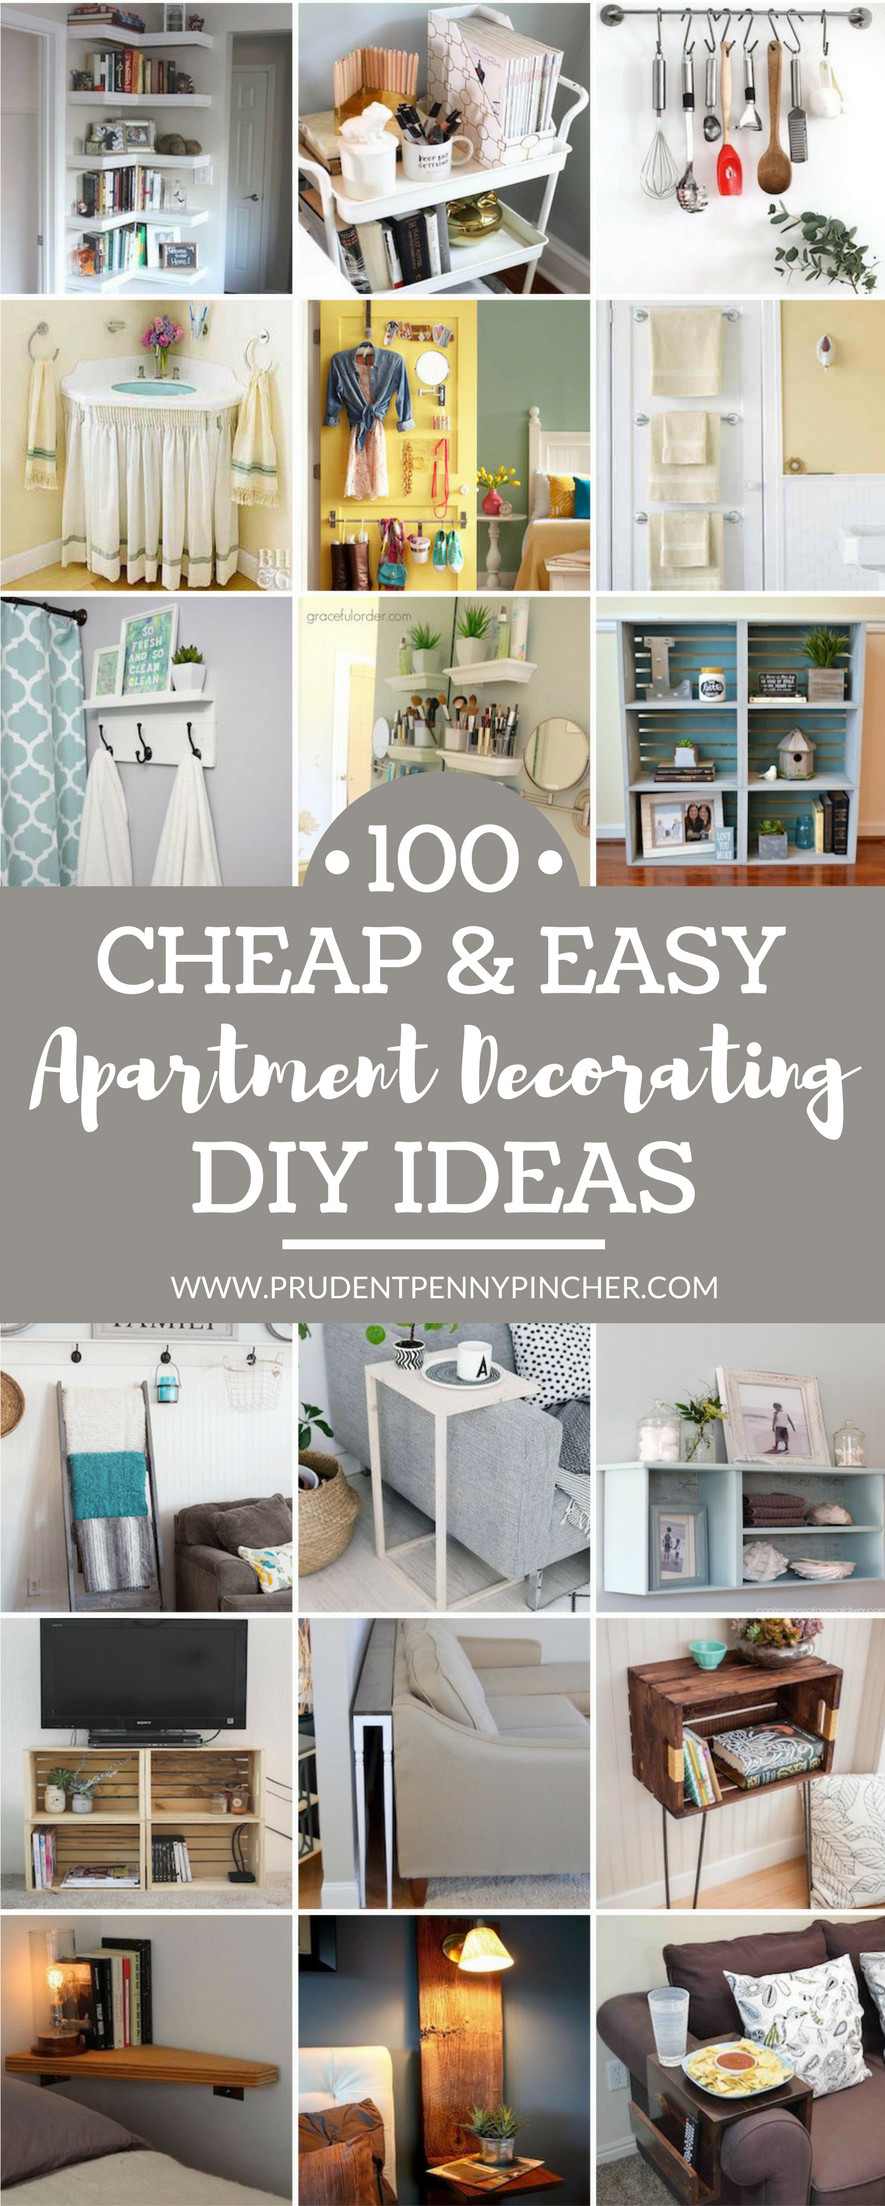 DIY Apartment Decorating On A Budget
 100 Cheap and Easy DIY Apartment Decorating Ideas